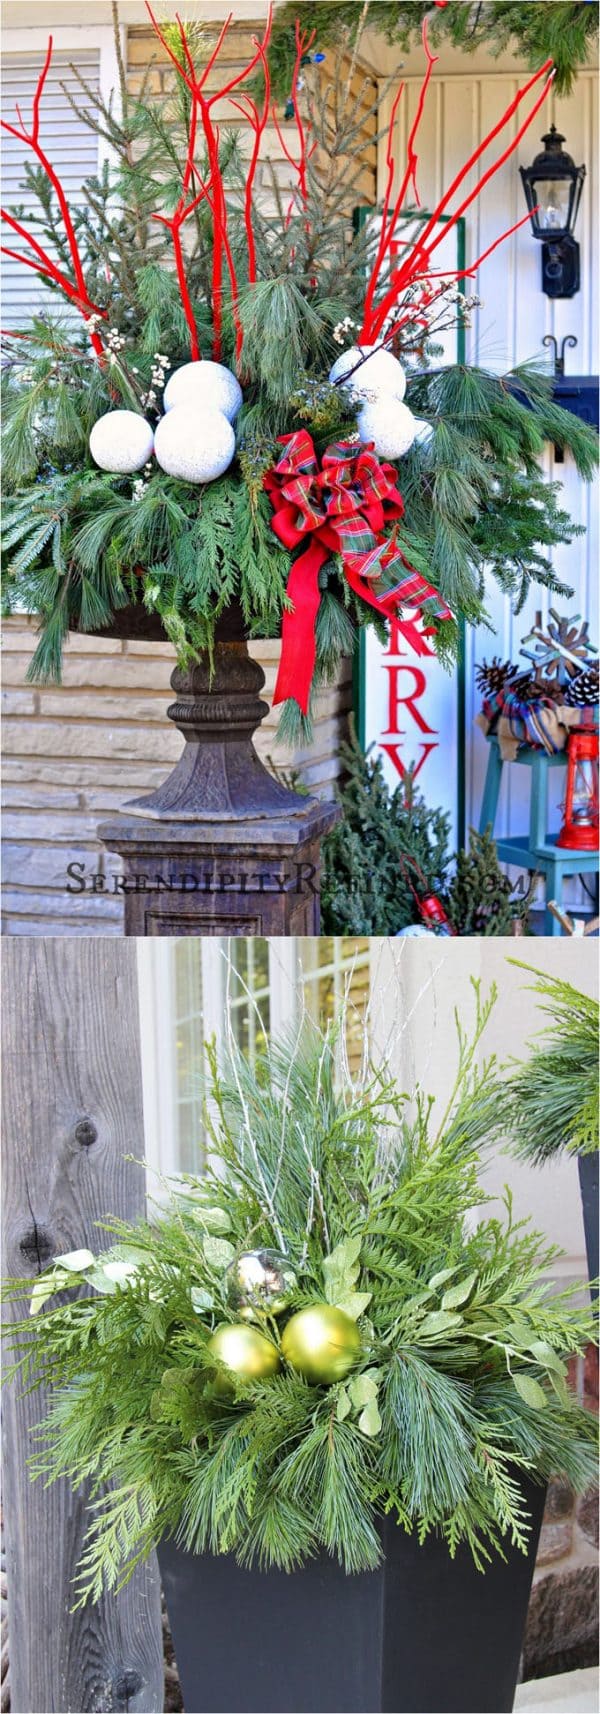 24 Colorful Winter Planters & Christmas Outdoor Decorations - A Piece ...